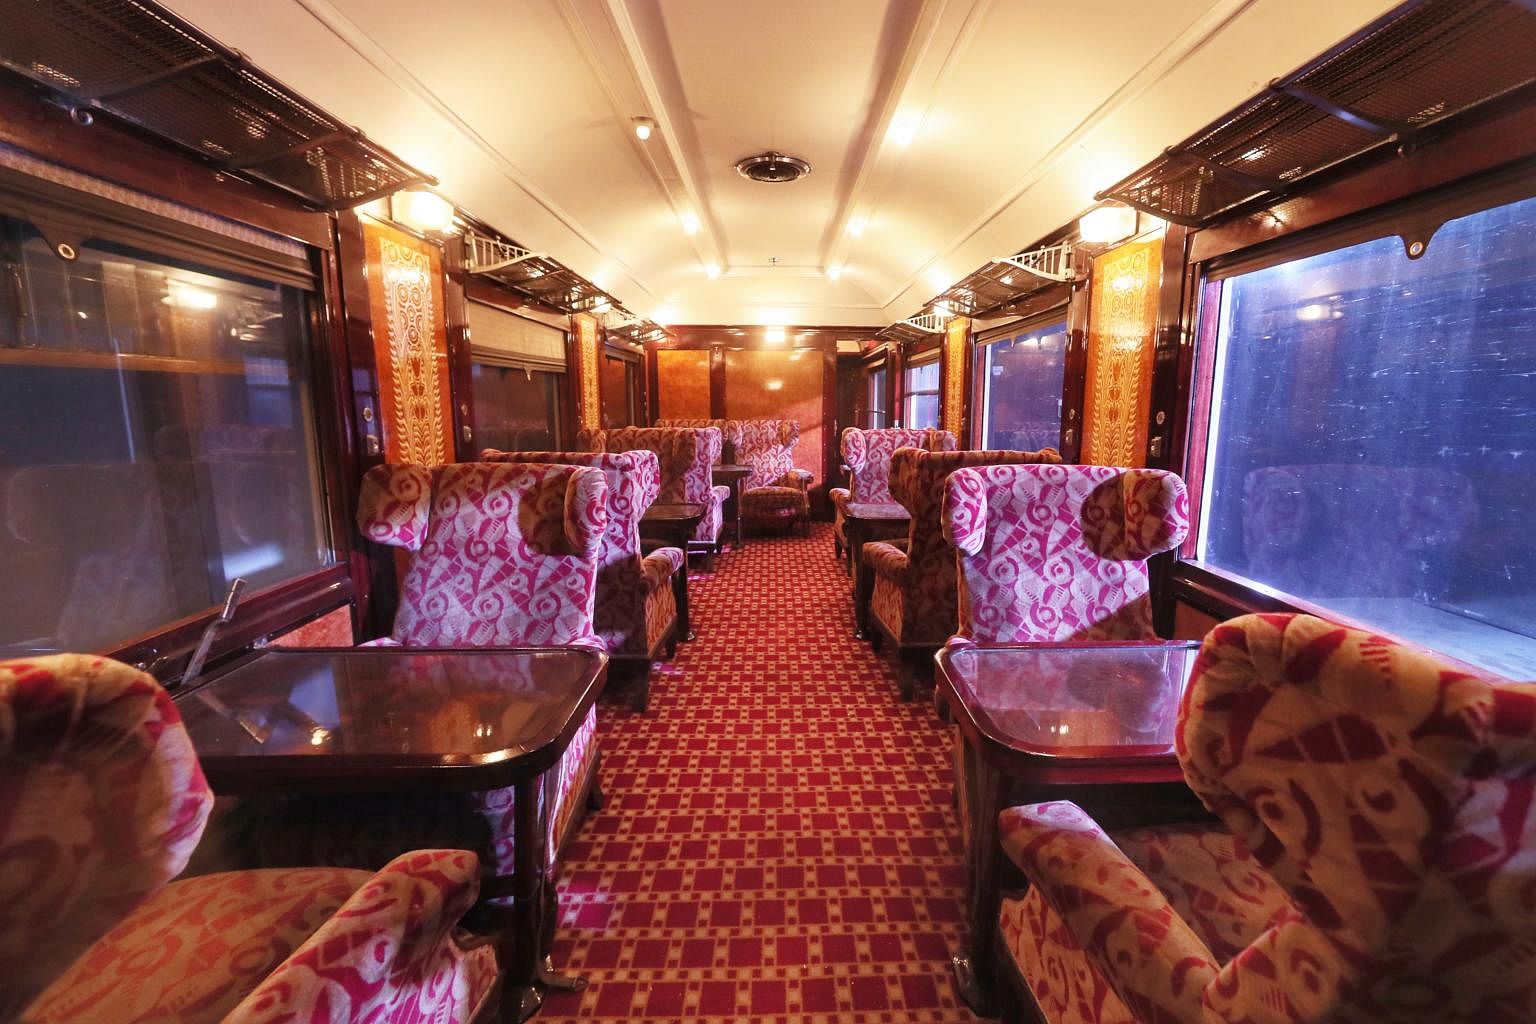 Suite Life: Journey to the 1900s on an Orient Express staycation at  Fairmont